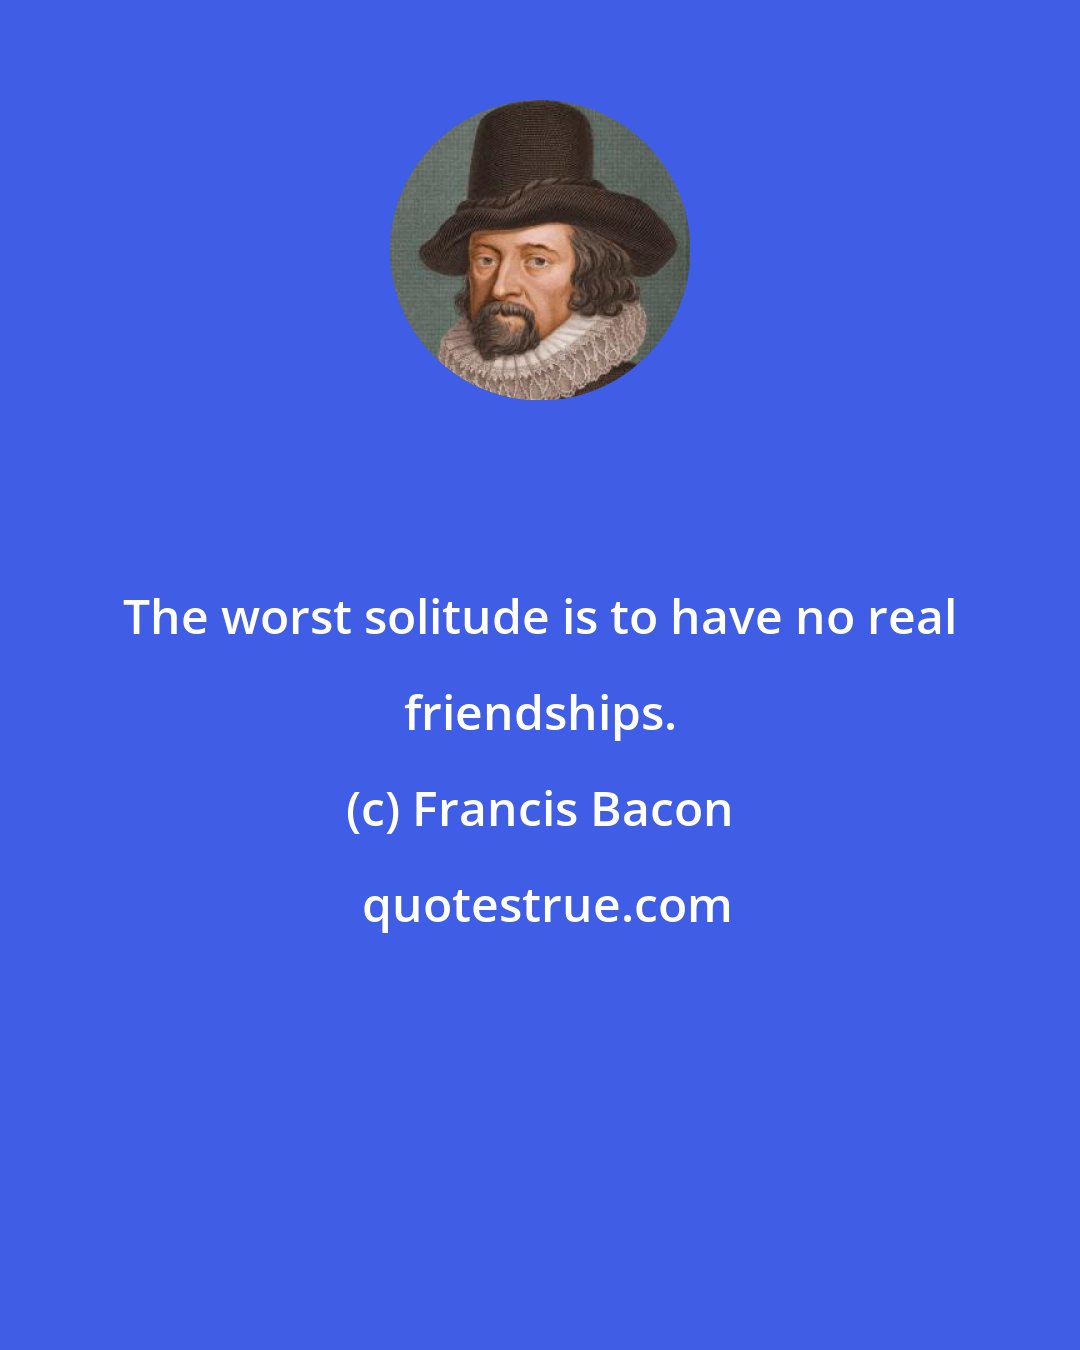 Francis Bacon: The worst solitude is to have no real friendships.